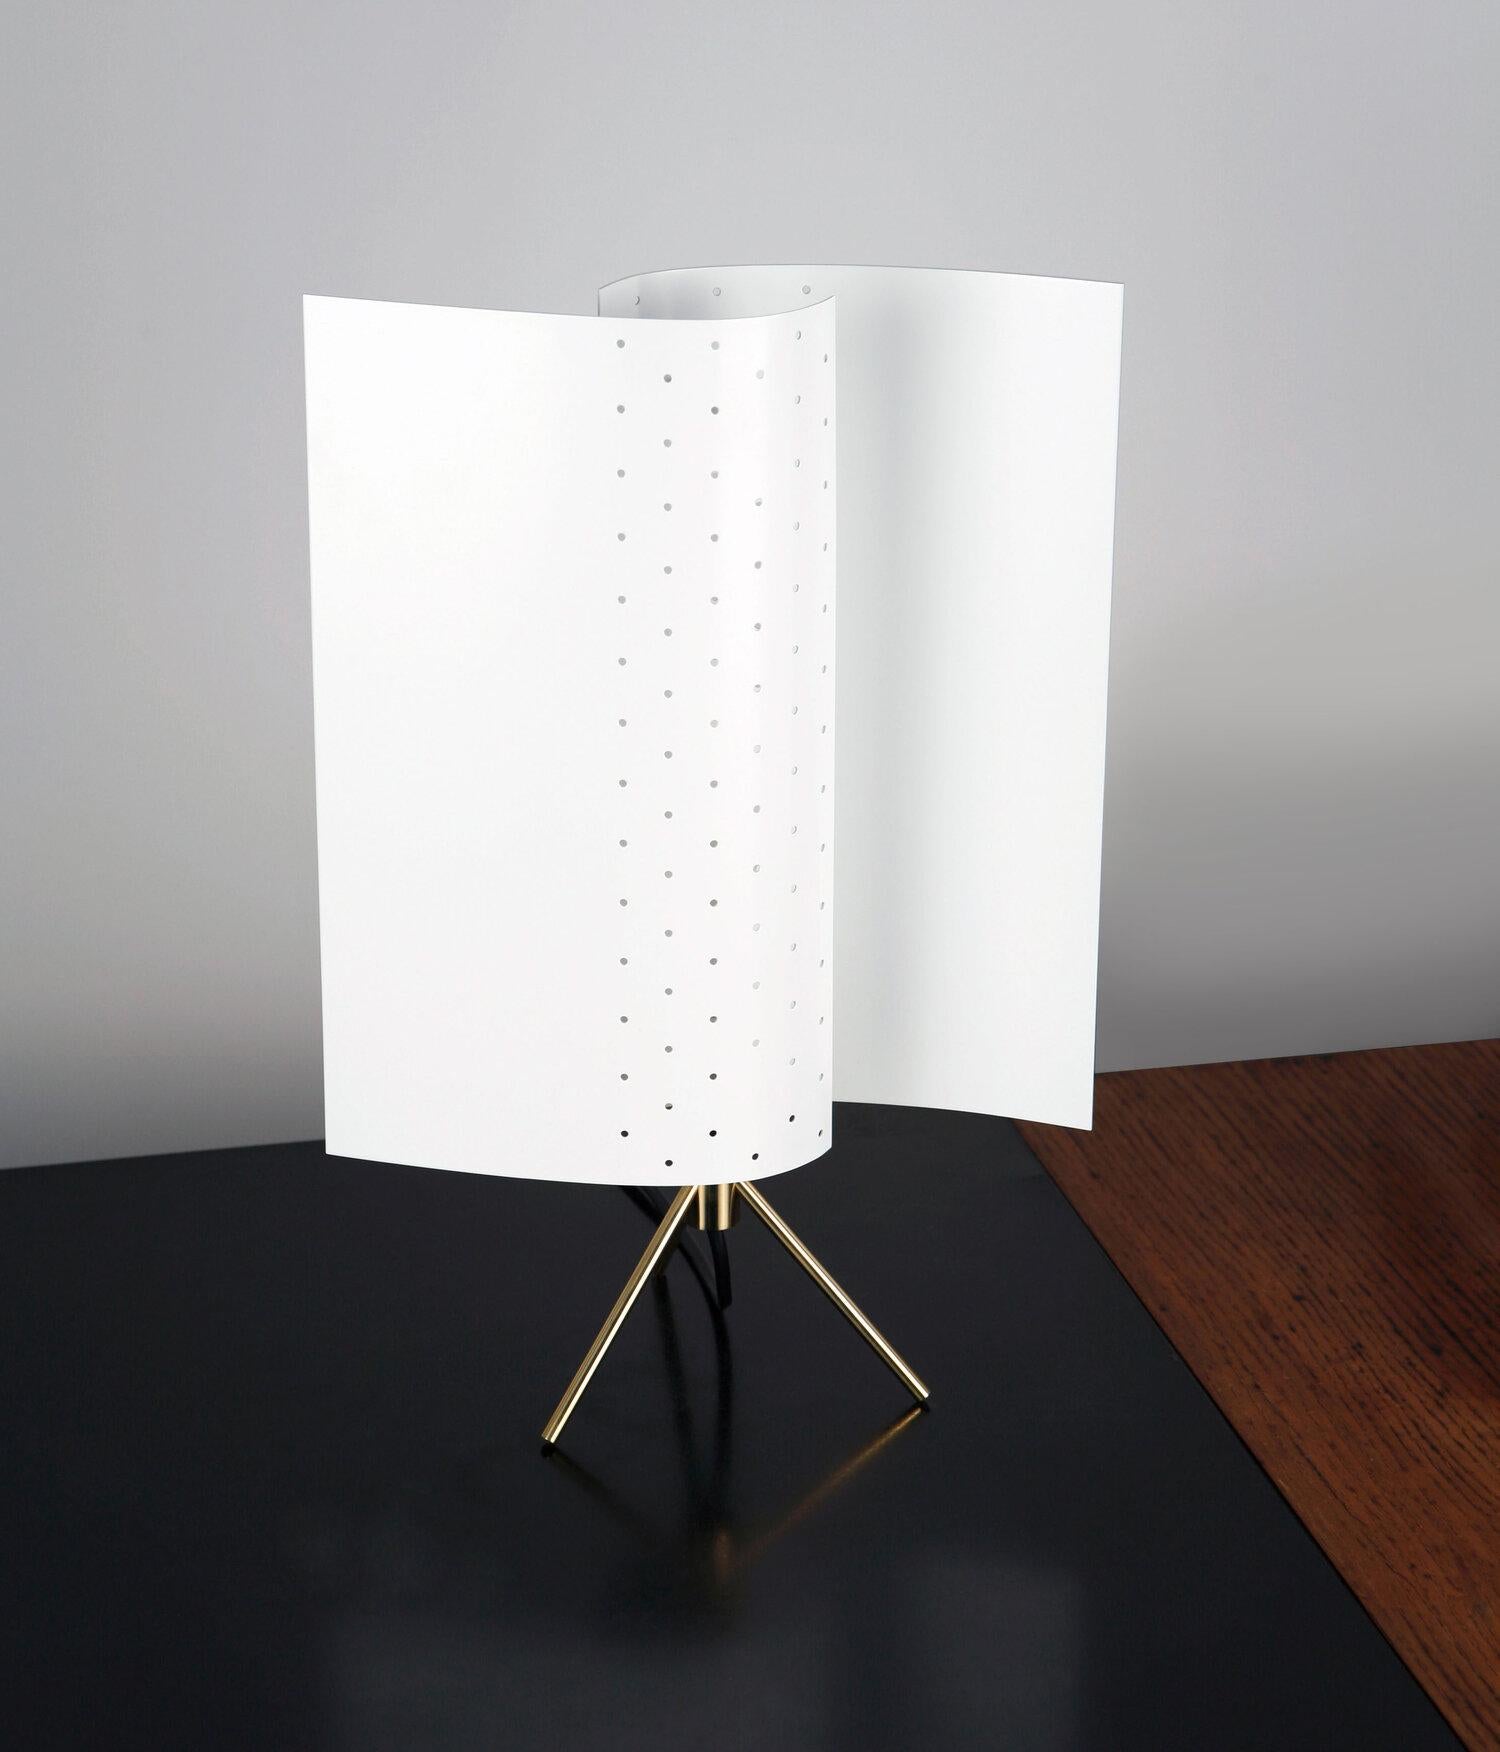 Michel Buffet Mid-Century Modern white B207 desk lamp designed in 1953.

The production of this re-edition lamps, wall lights and floor lamps are manufactured using craftsman’s techniques with the same materials and techniques as the first models.